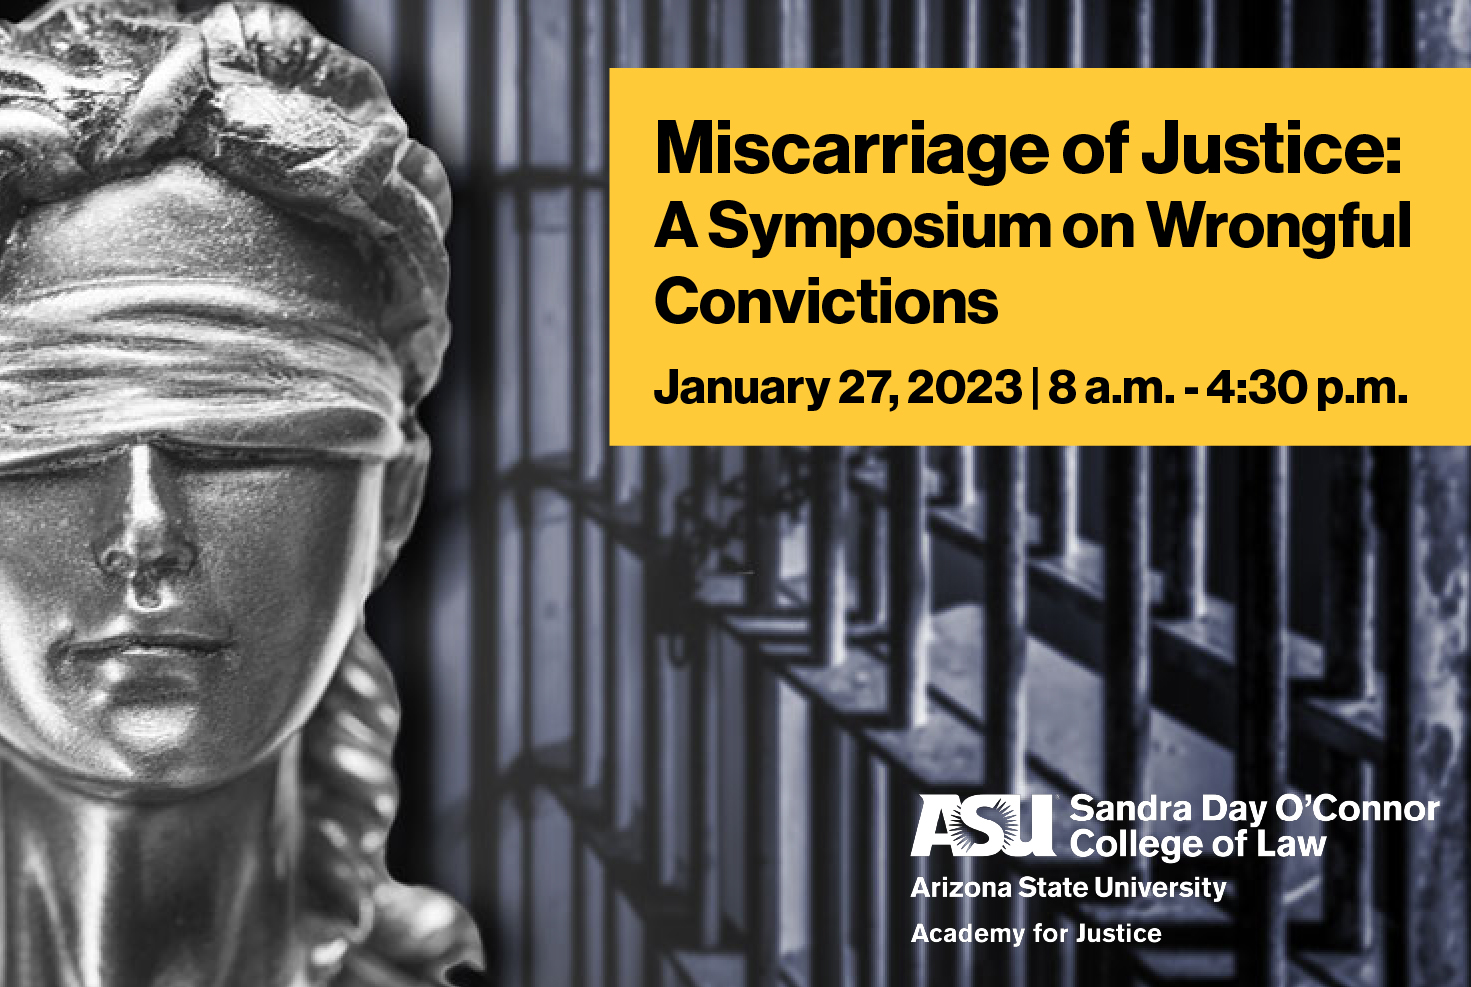 Miscarriage of Justice: A Symposium on Wrongful Convictions, January 27, 2023, 8 a.m. - 430 p.m.